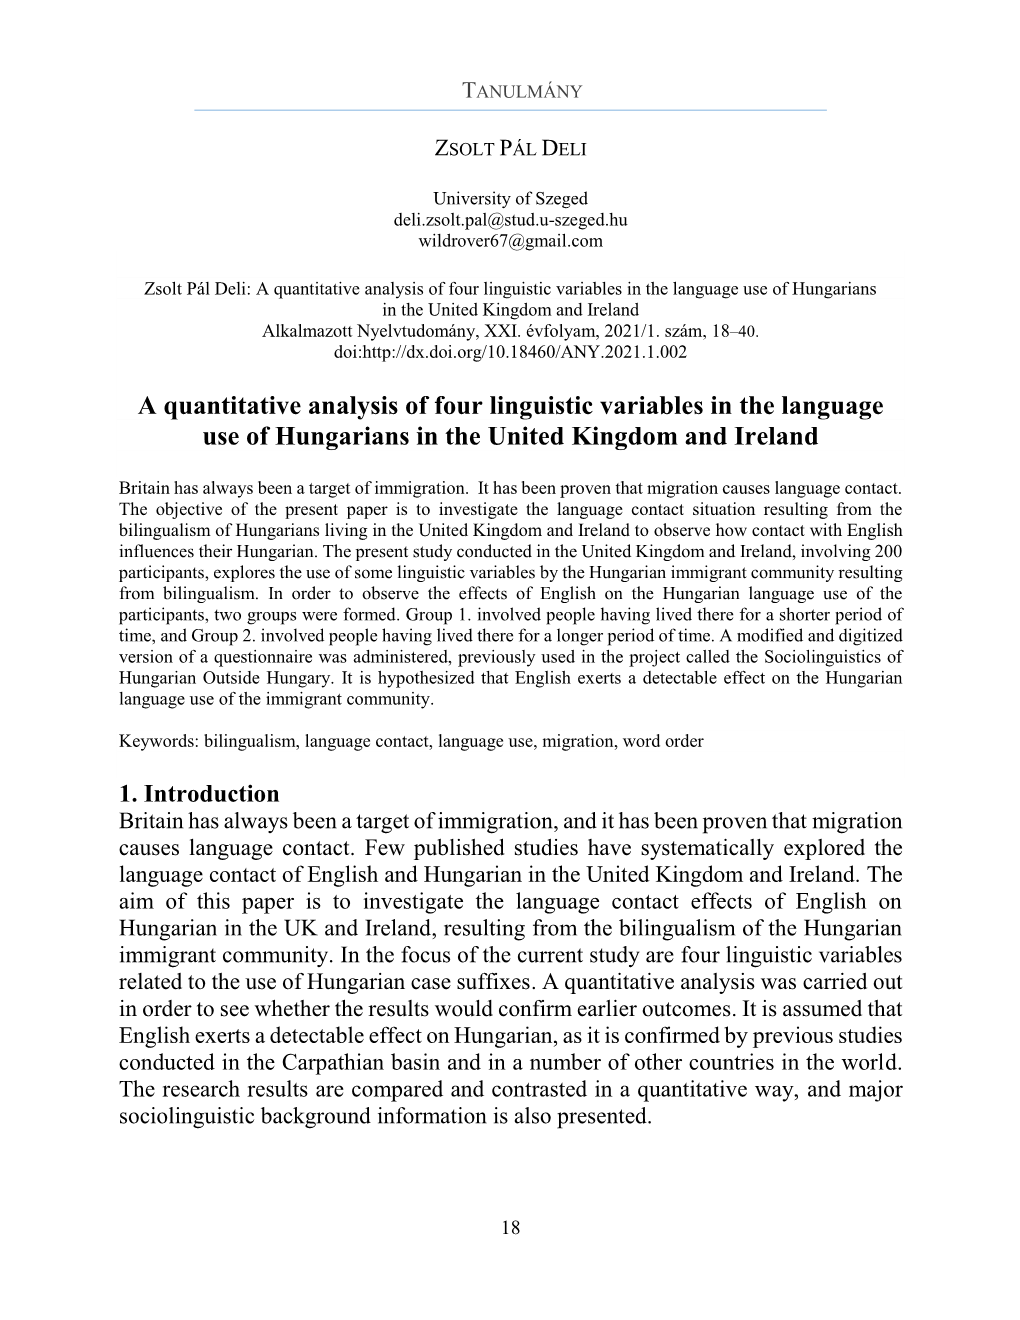 A Quantitative Analysis of Four Linguistic Variables in the Language Use of Hungarians in the United Kingdom and Ireland Alkalmazott Nyelvtudomány, XXI